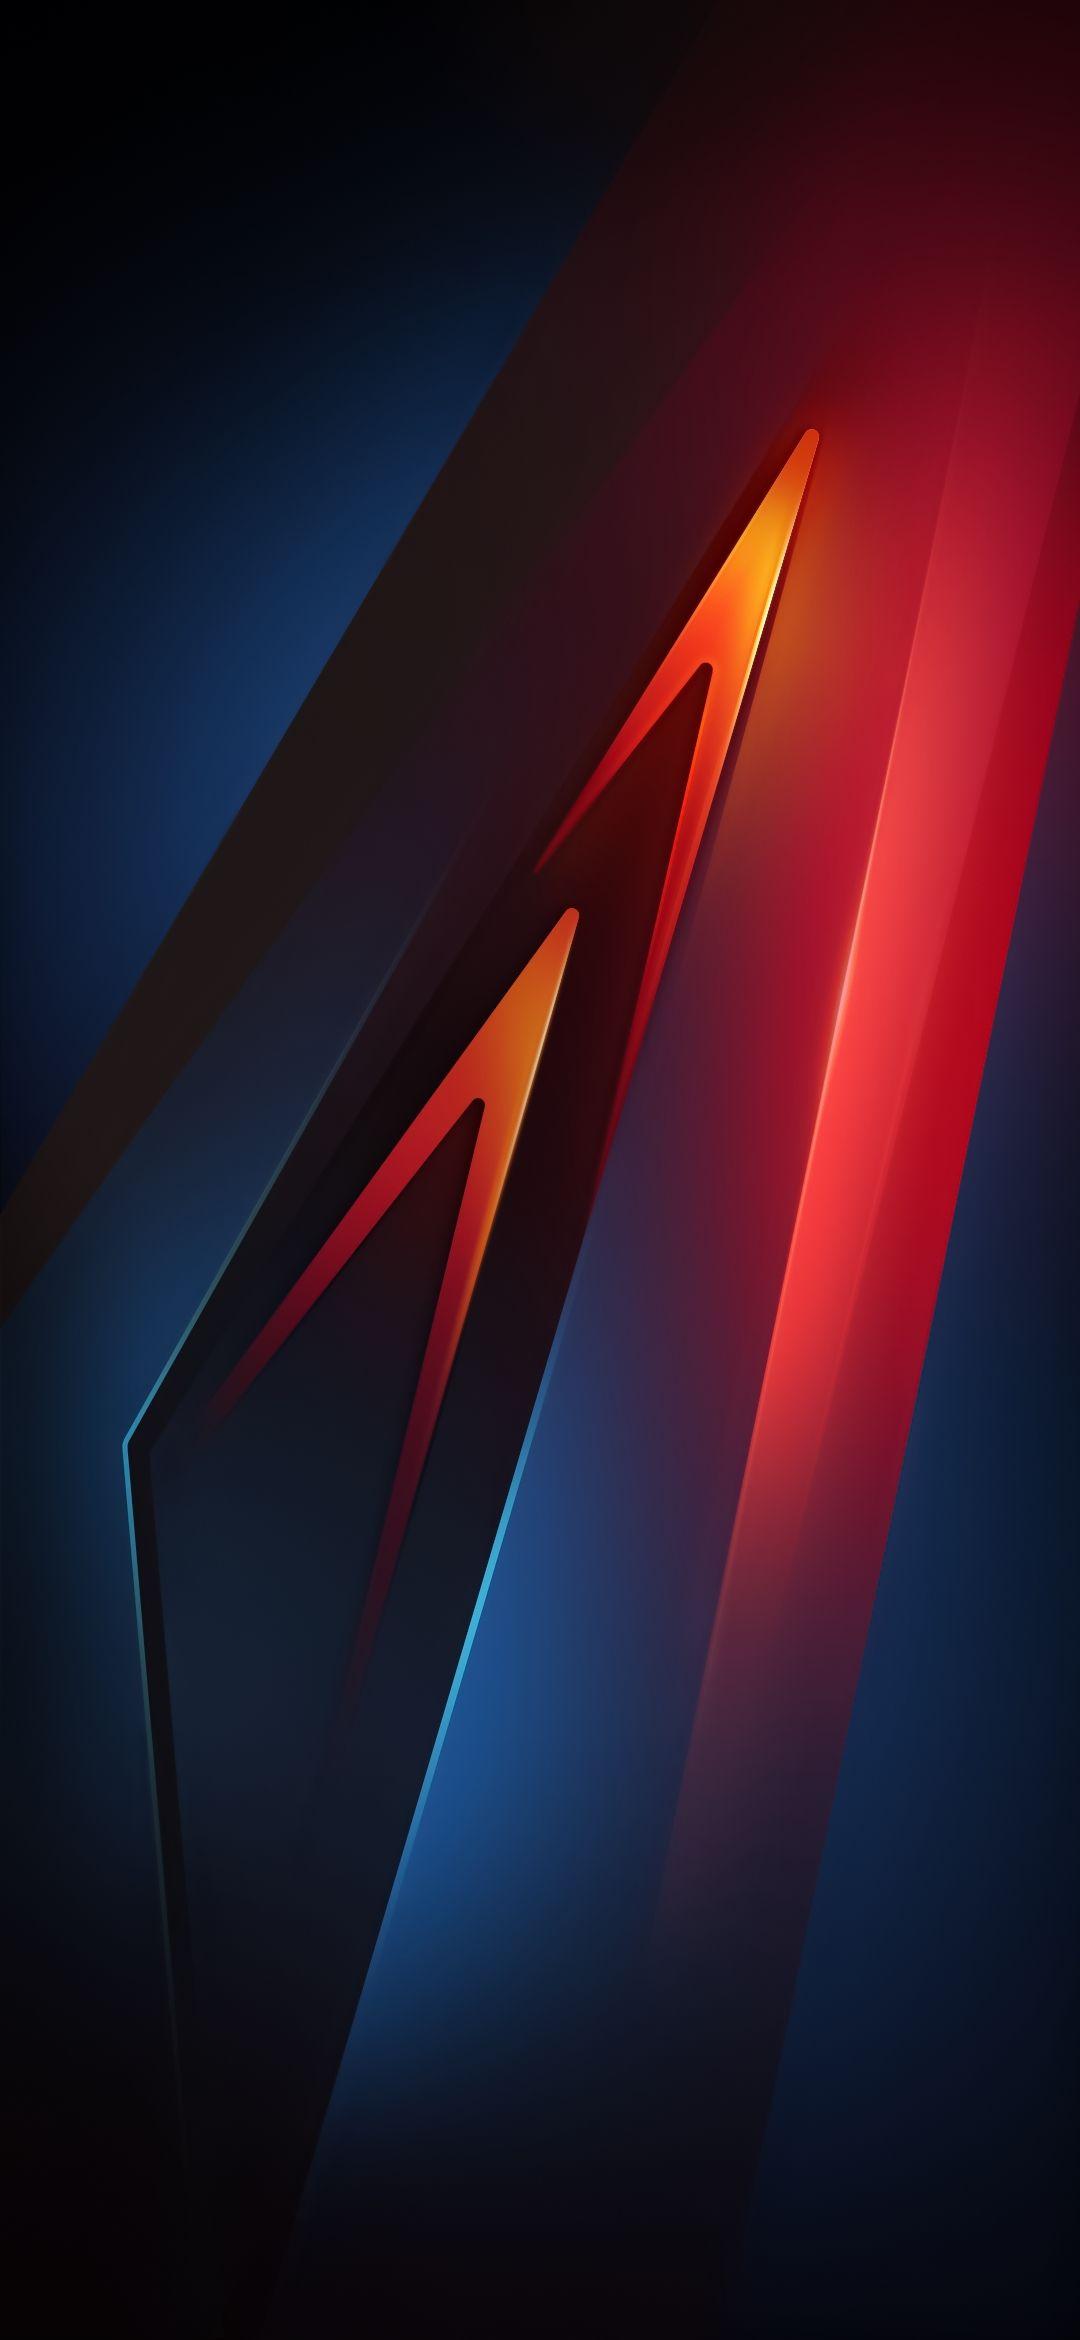 Qualcomm Snapdragon Wallpapers - Top Free Qualcomm Snapdragon ...